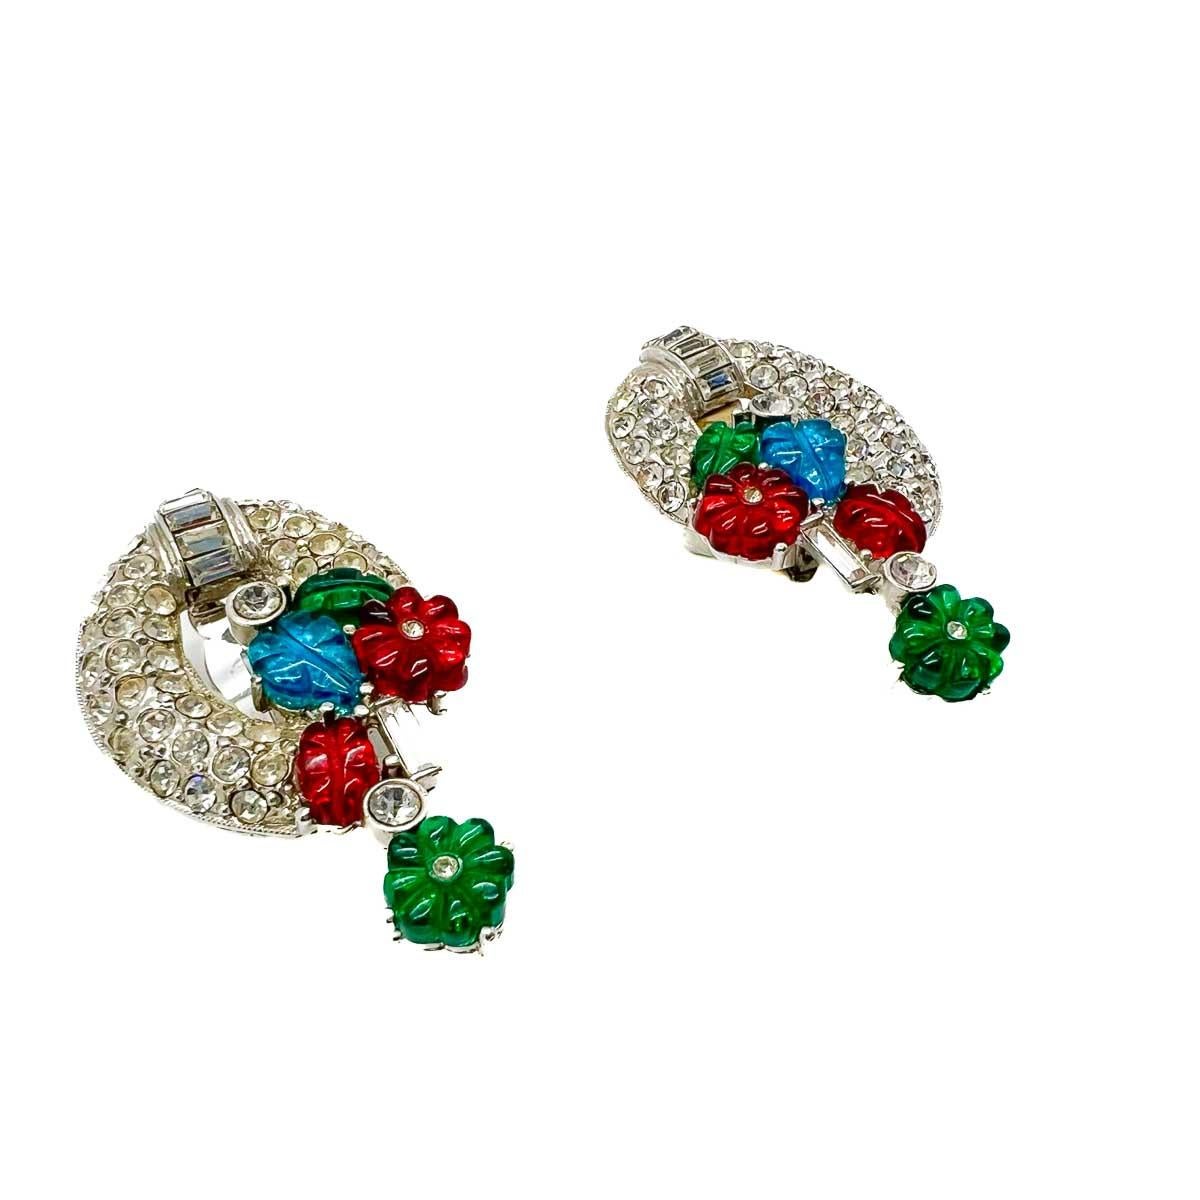 A fabulous pair of Vintage Art Deco '89 Tutti Frutti Earrings. A timeless Art Deco design is smothered in an array of pave set crystals and Tutti Frutti style glass motifs in gem colours. A rare and glamorous find.
An unsigned beauty. A rare